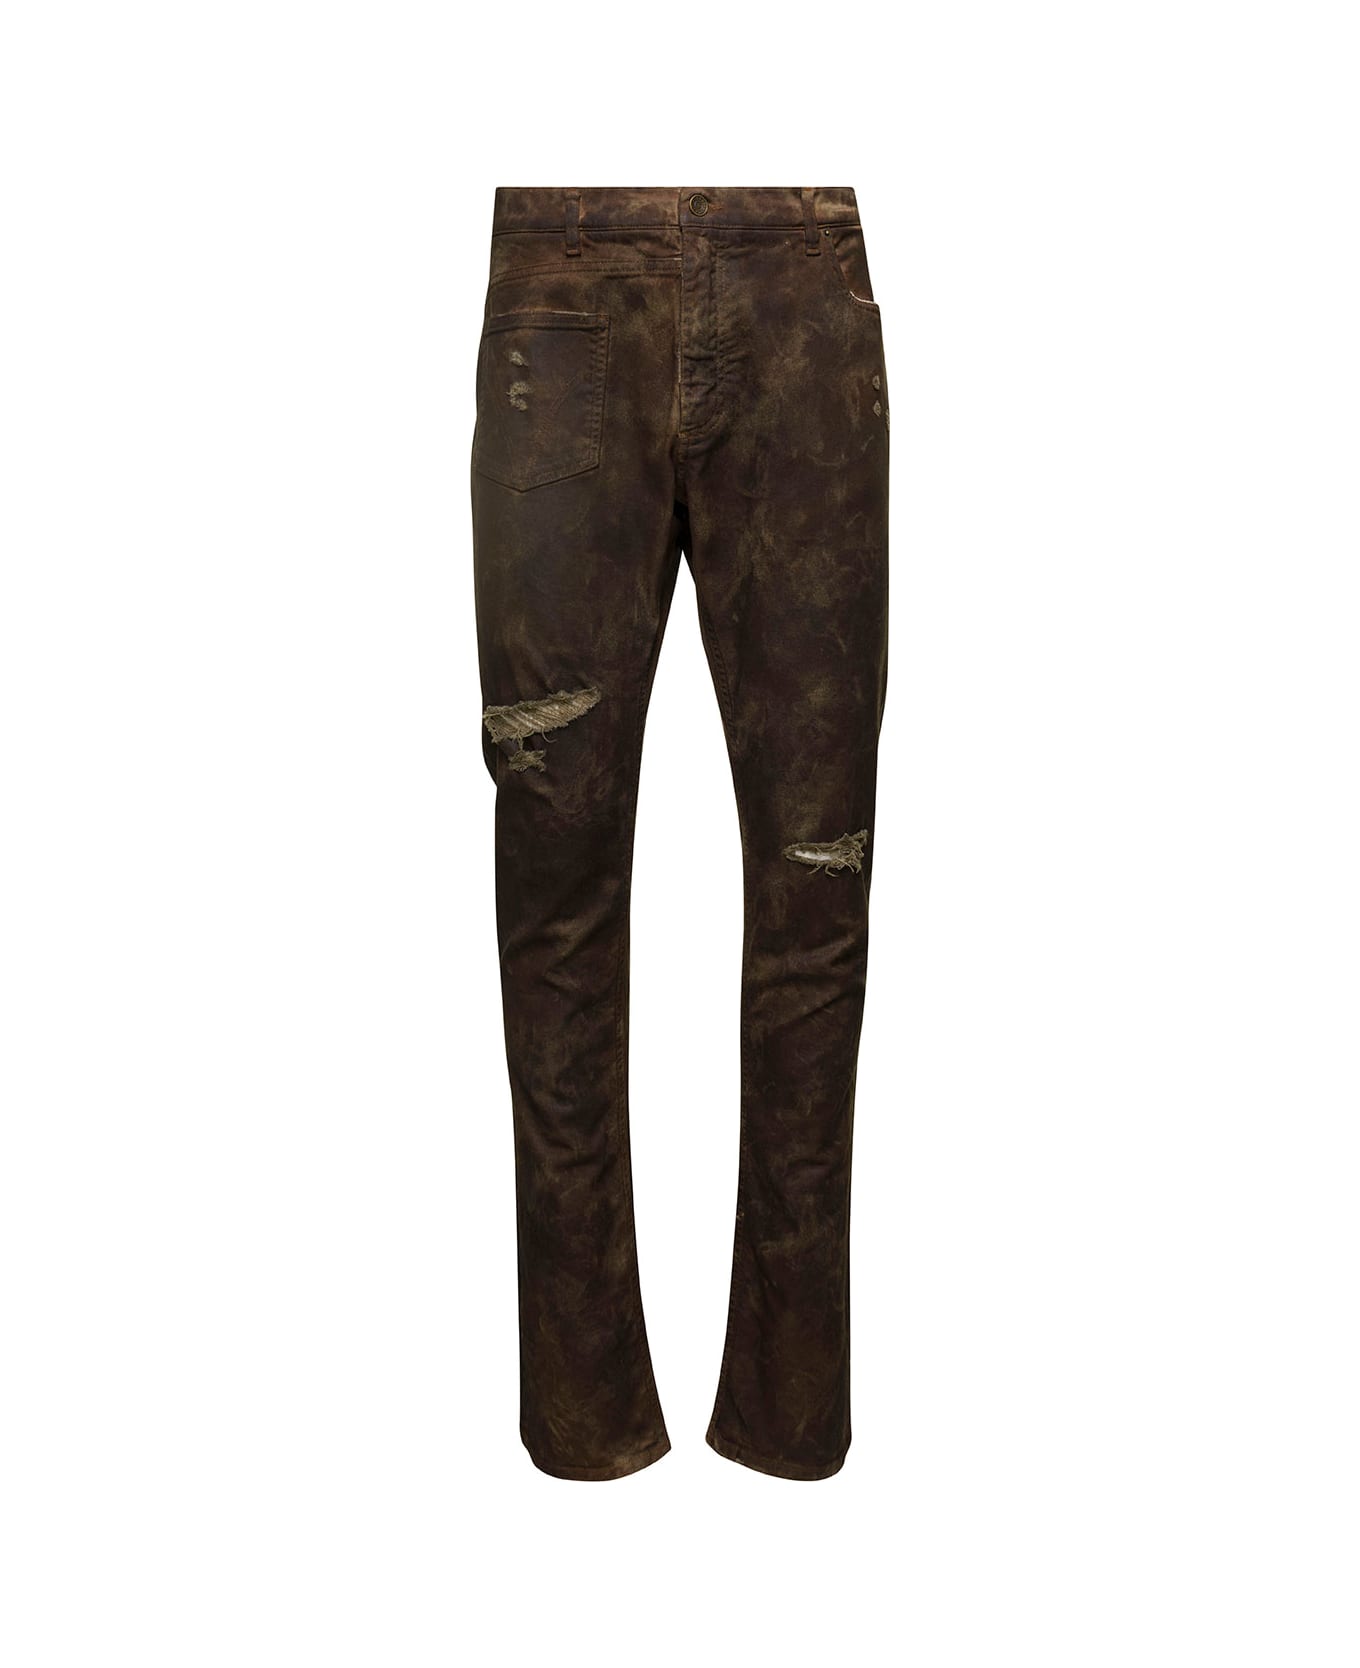 Dolce & Gabbana Brown Fitted Jeans With Ripped Details In Cotton Denim Man - Brown デニム